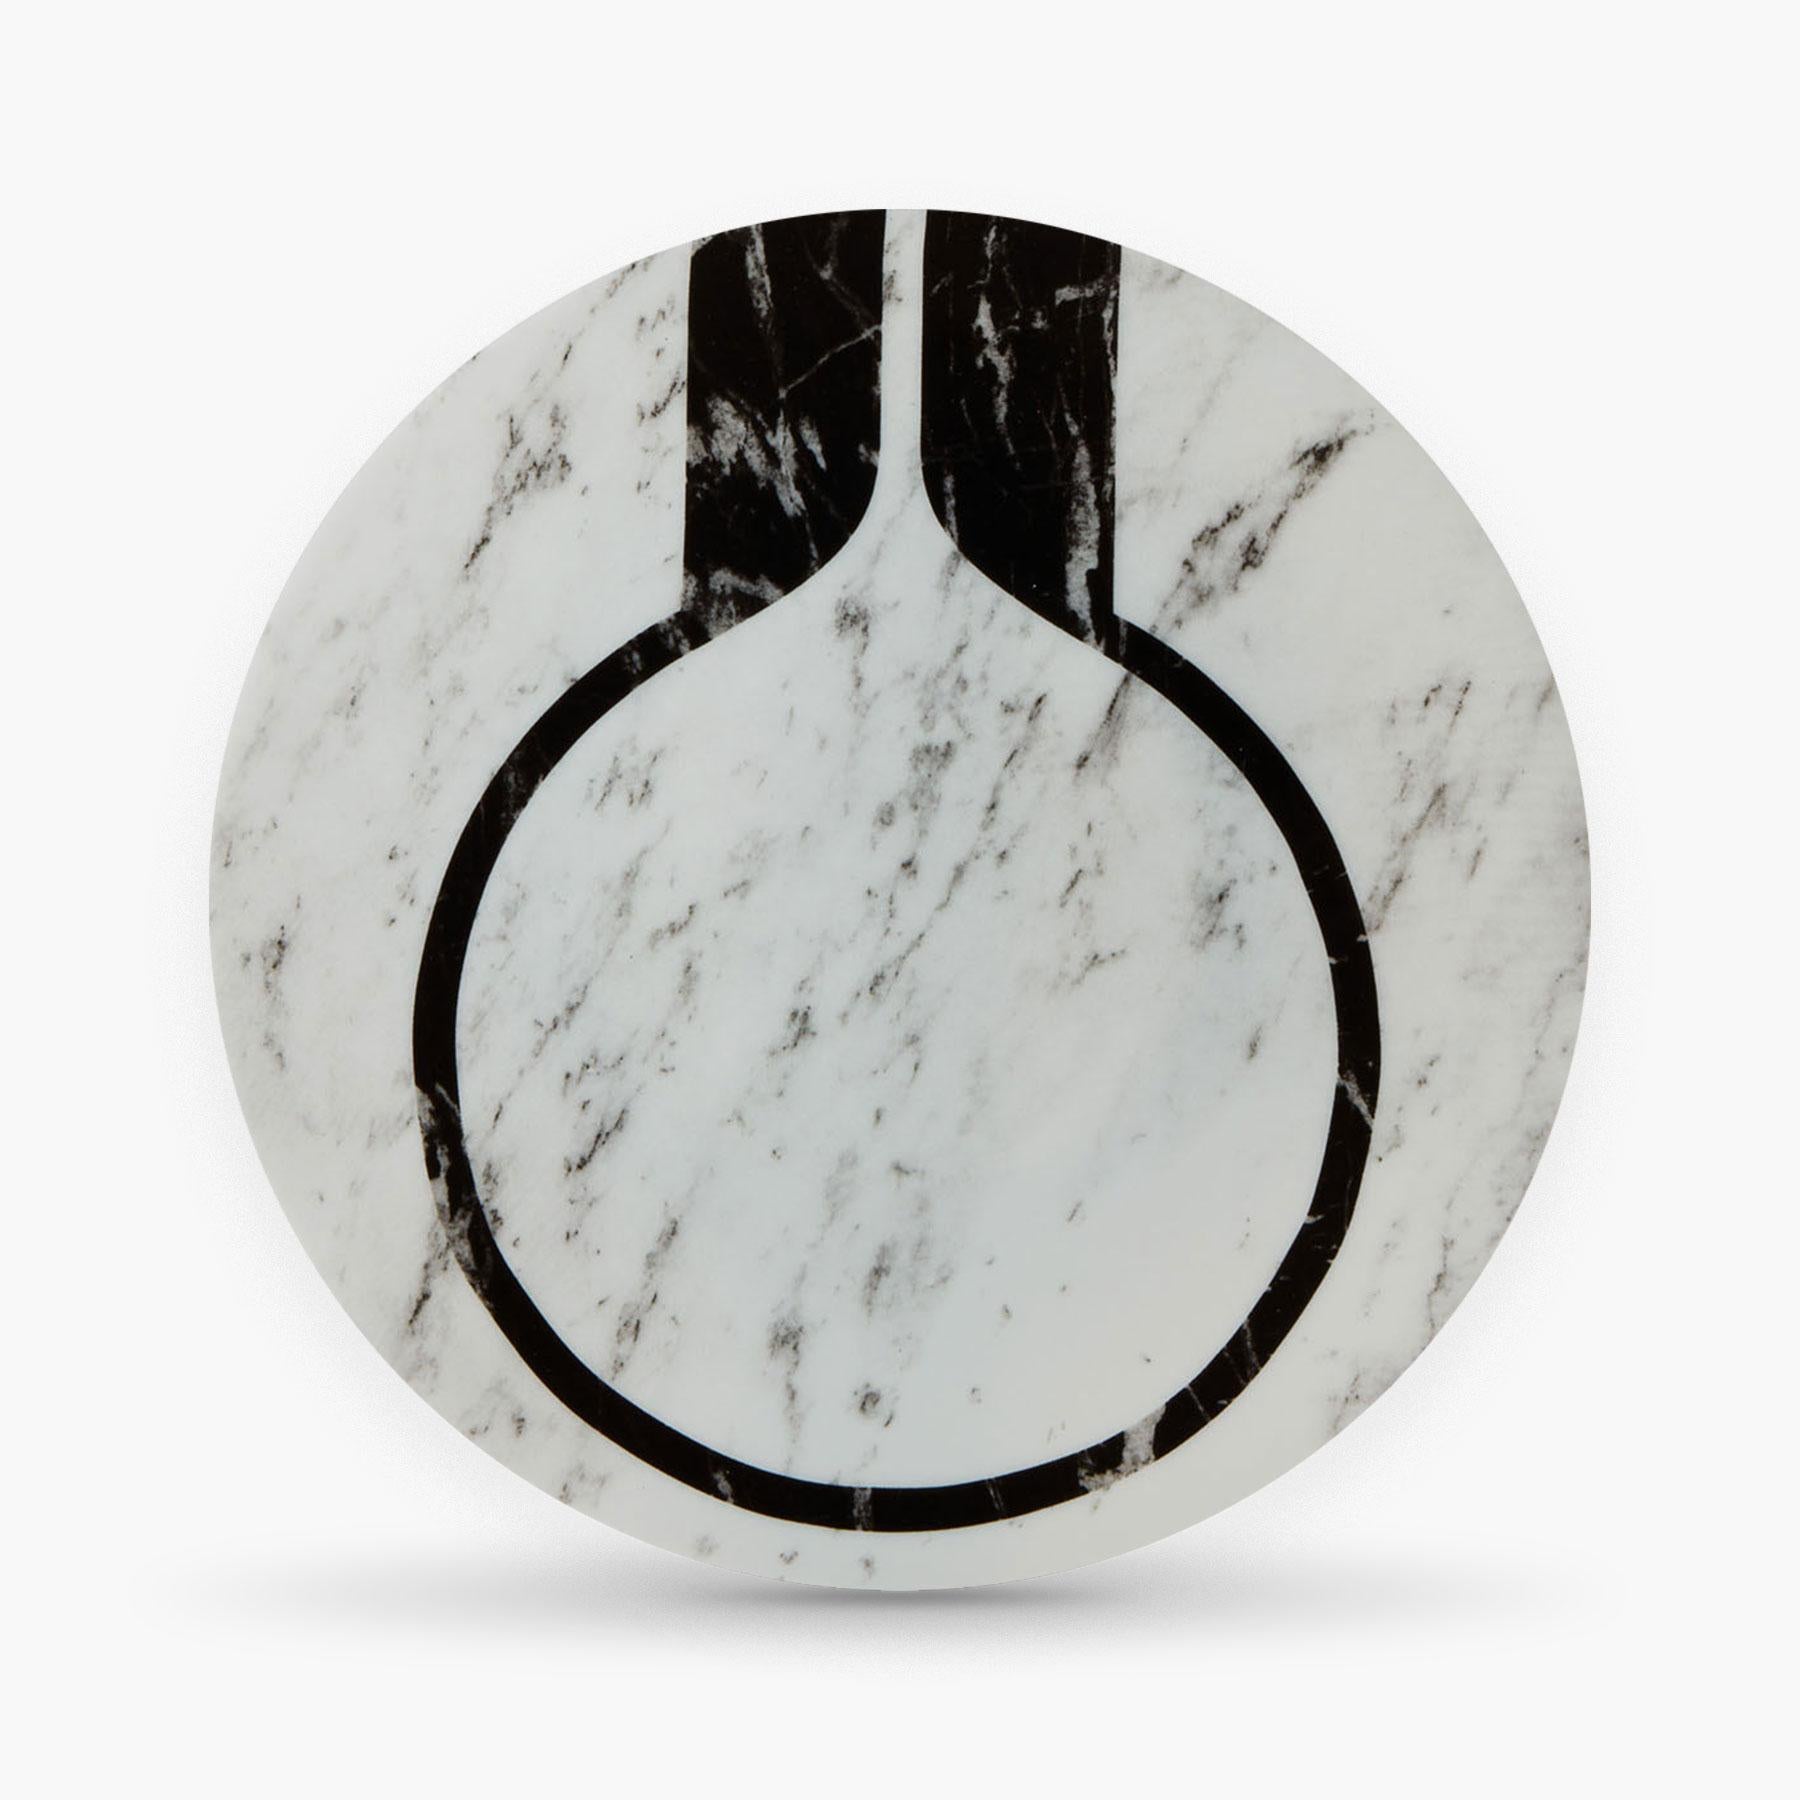 Etienne Bardelli, plastic artist, interprets in his own way the architecture of Rue de Paradis: a sweet mix between the 1930s and the 1970s.

Porcelain of Limoges extra fine.
Black and white serigraphy.
Diameter: 27 cm 
Height: 1.4 cm
Weight: 0.570